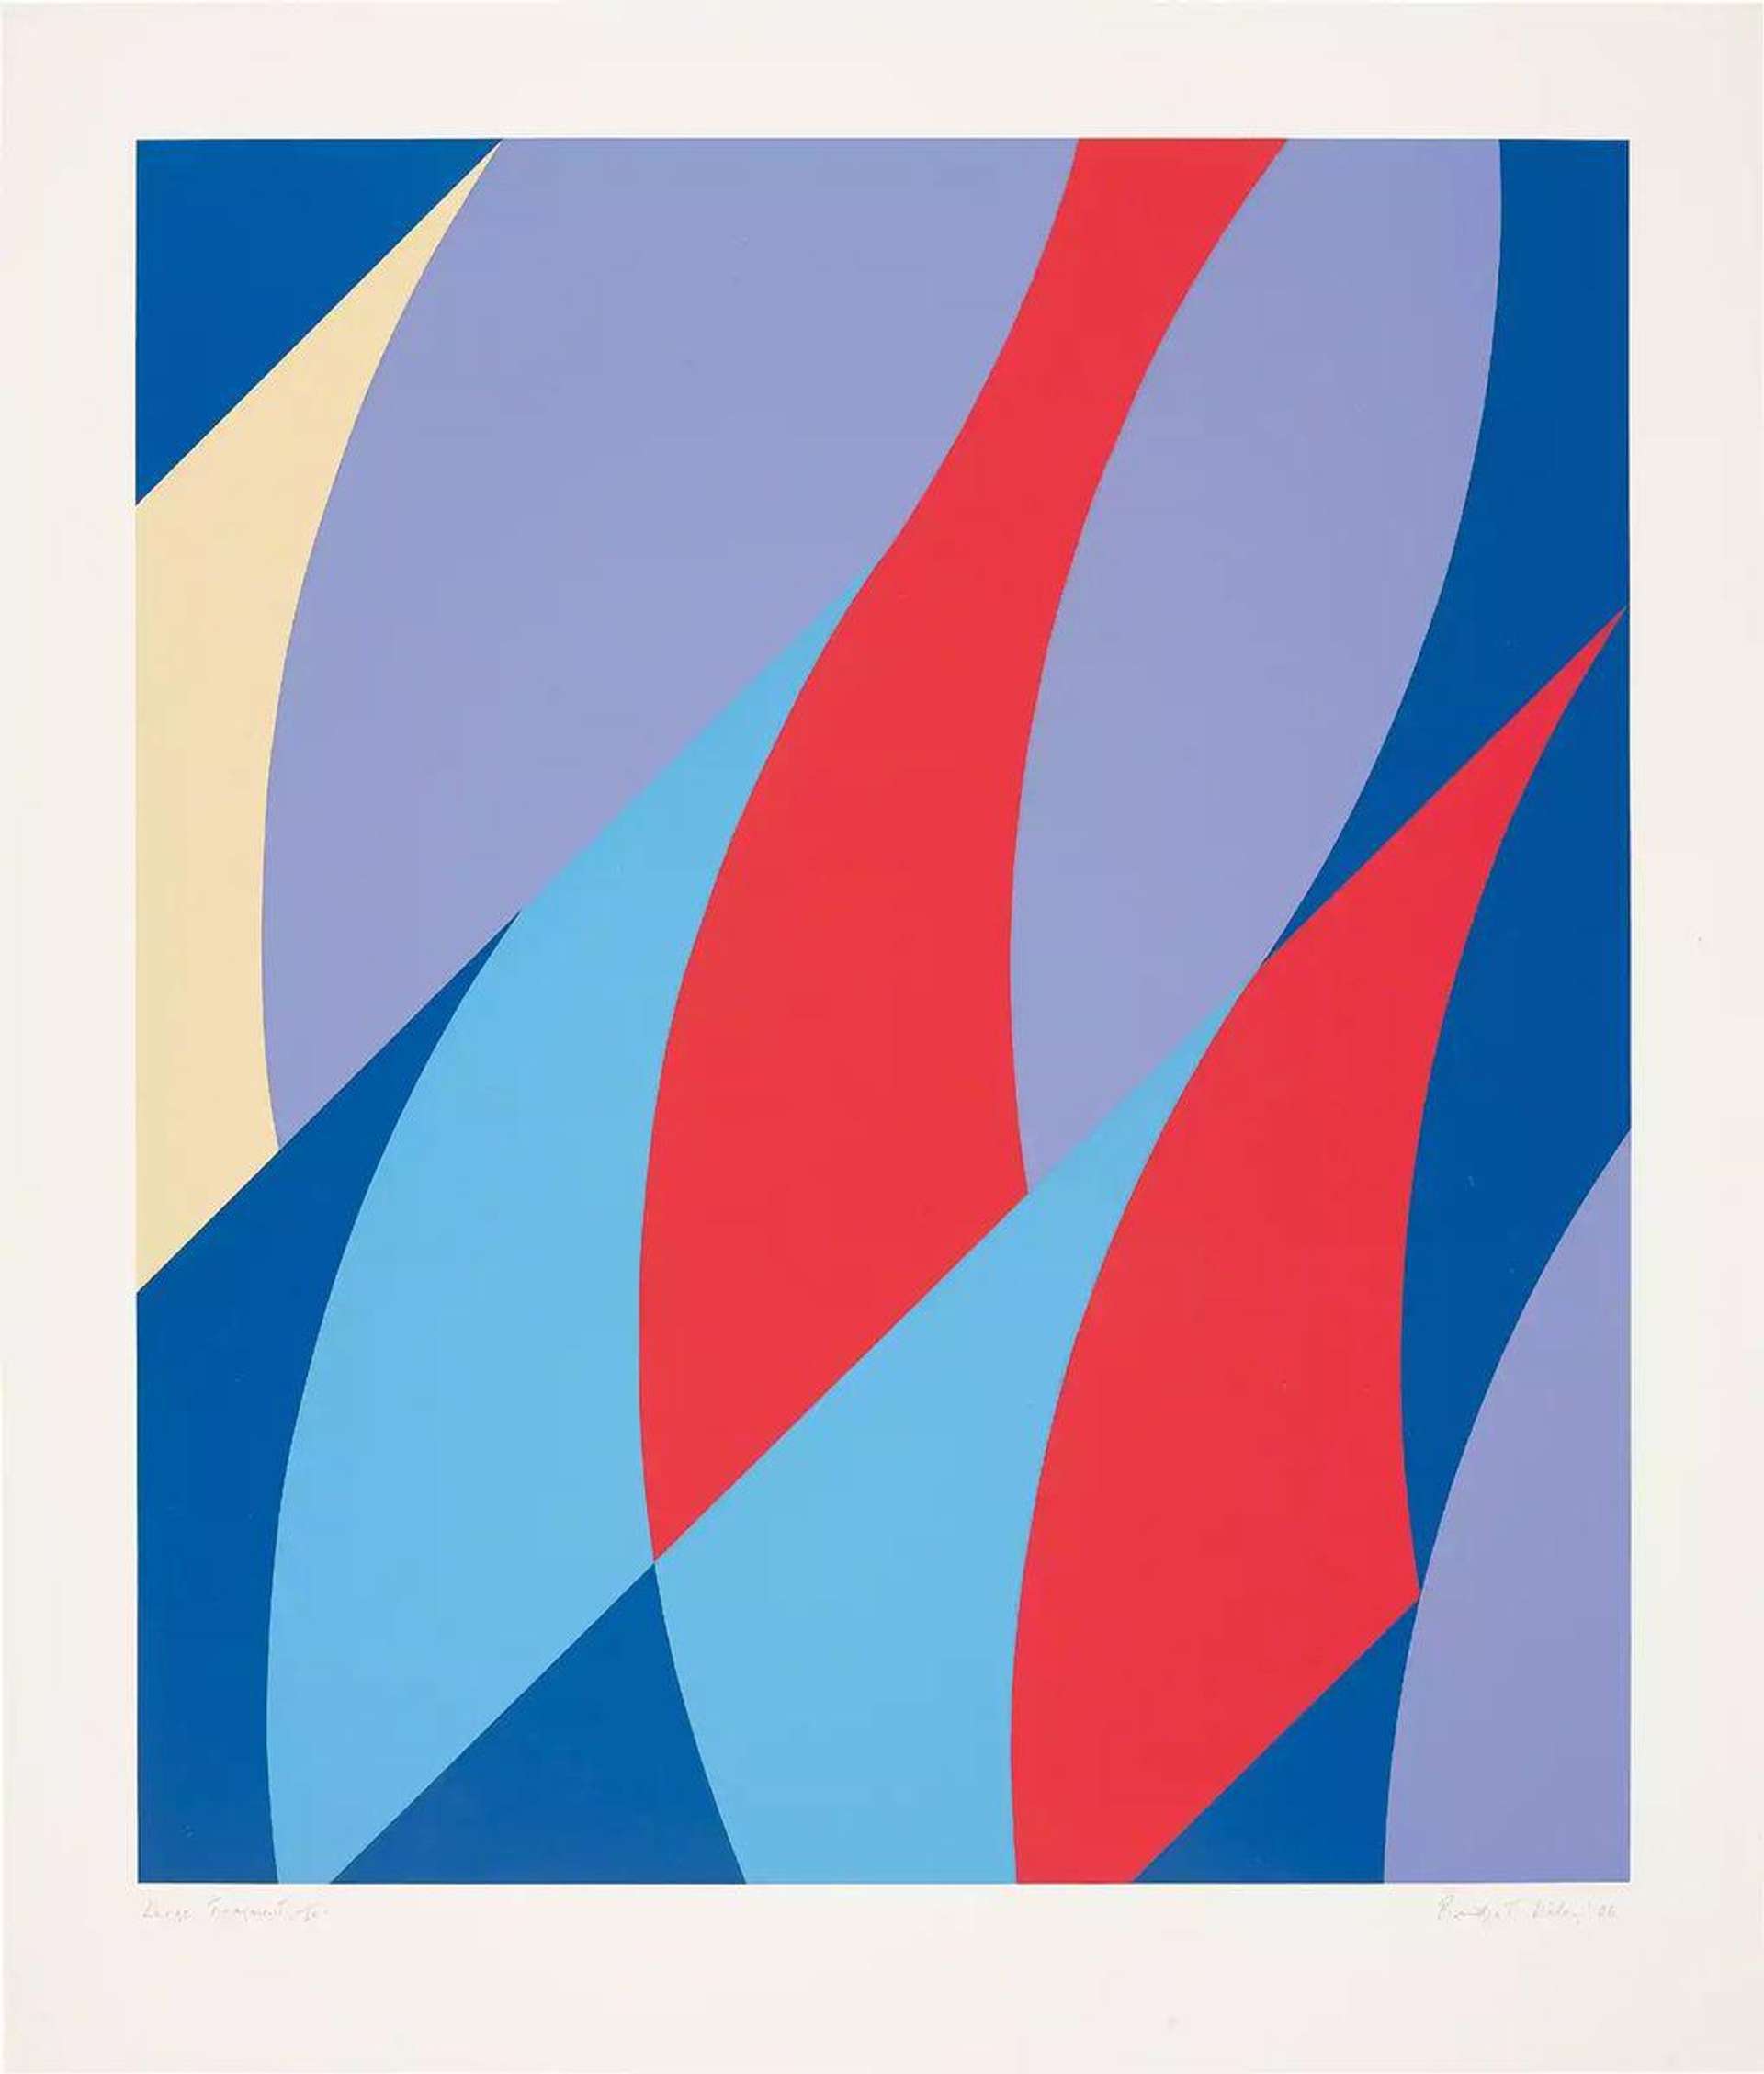 A screenprint by Bridget Riley depicting curved verticals and slanting diagonals in a pattern, in shades of blue, purple, white, and red.